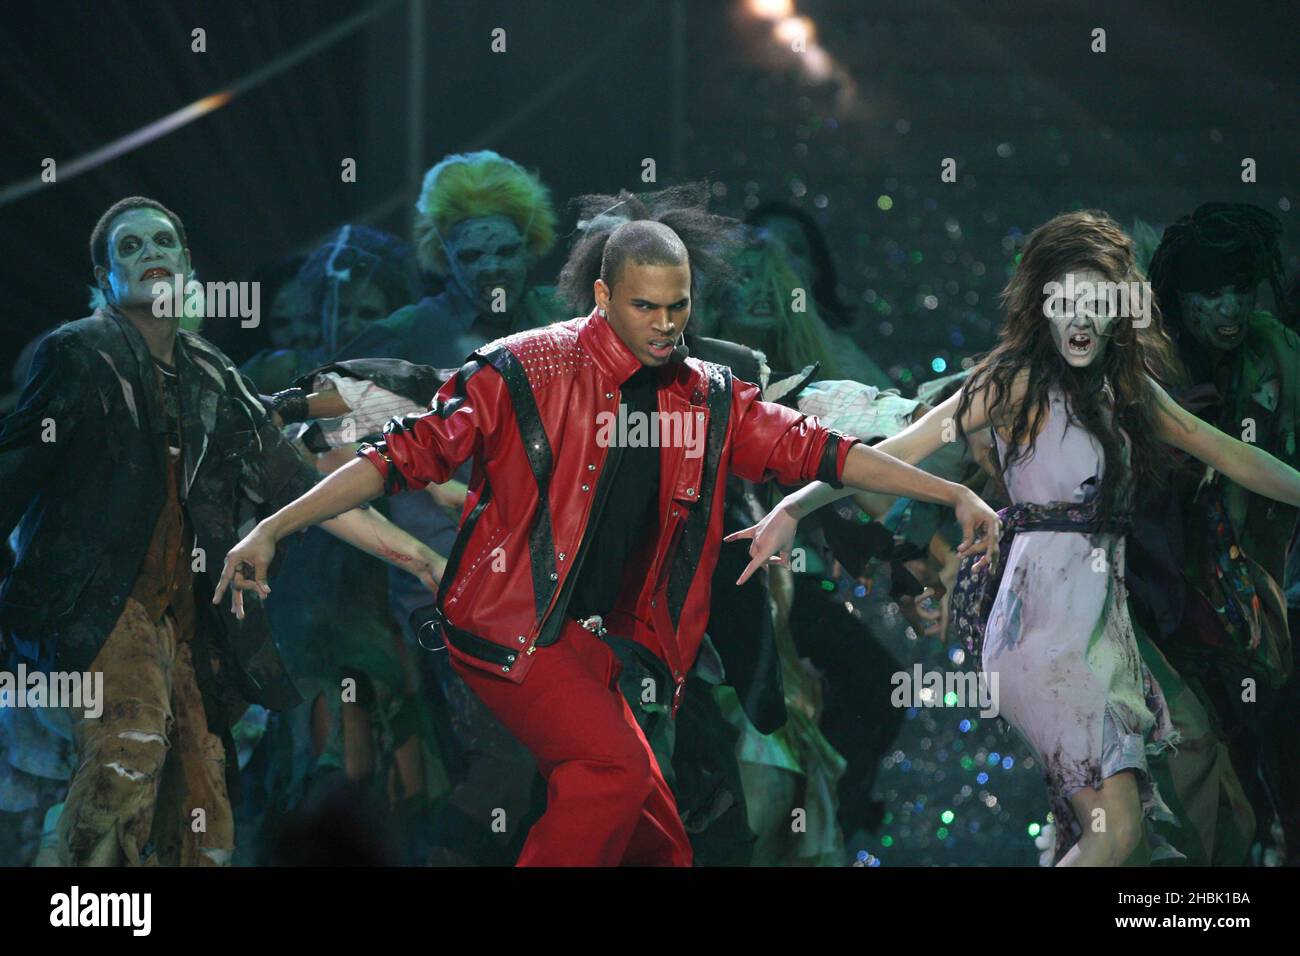 Chris Brown and dancers perform Michael Jackson's Thriller at the World Music Awards at Earls Court in Central London. Picture date: Wednesday 15 November 2006. Stock Photo